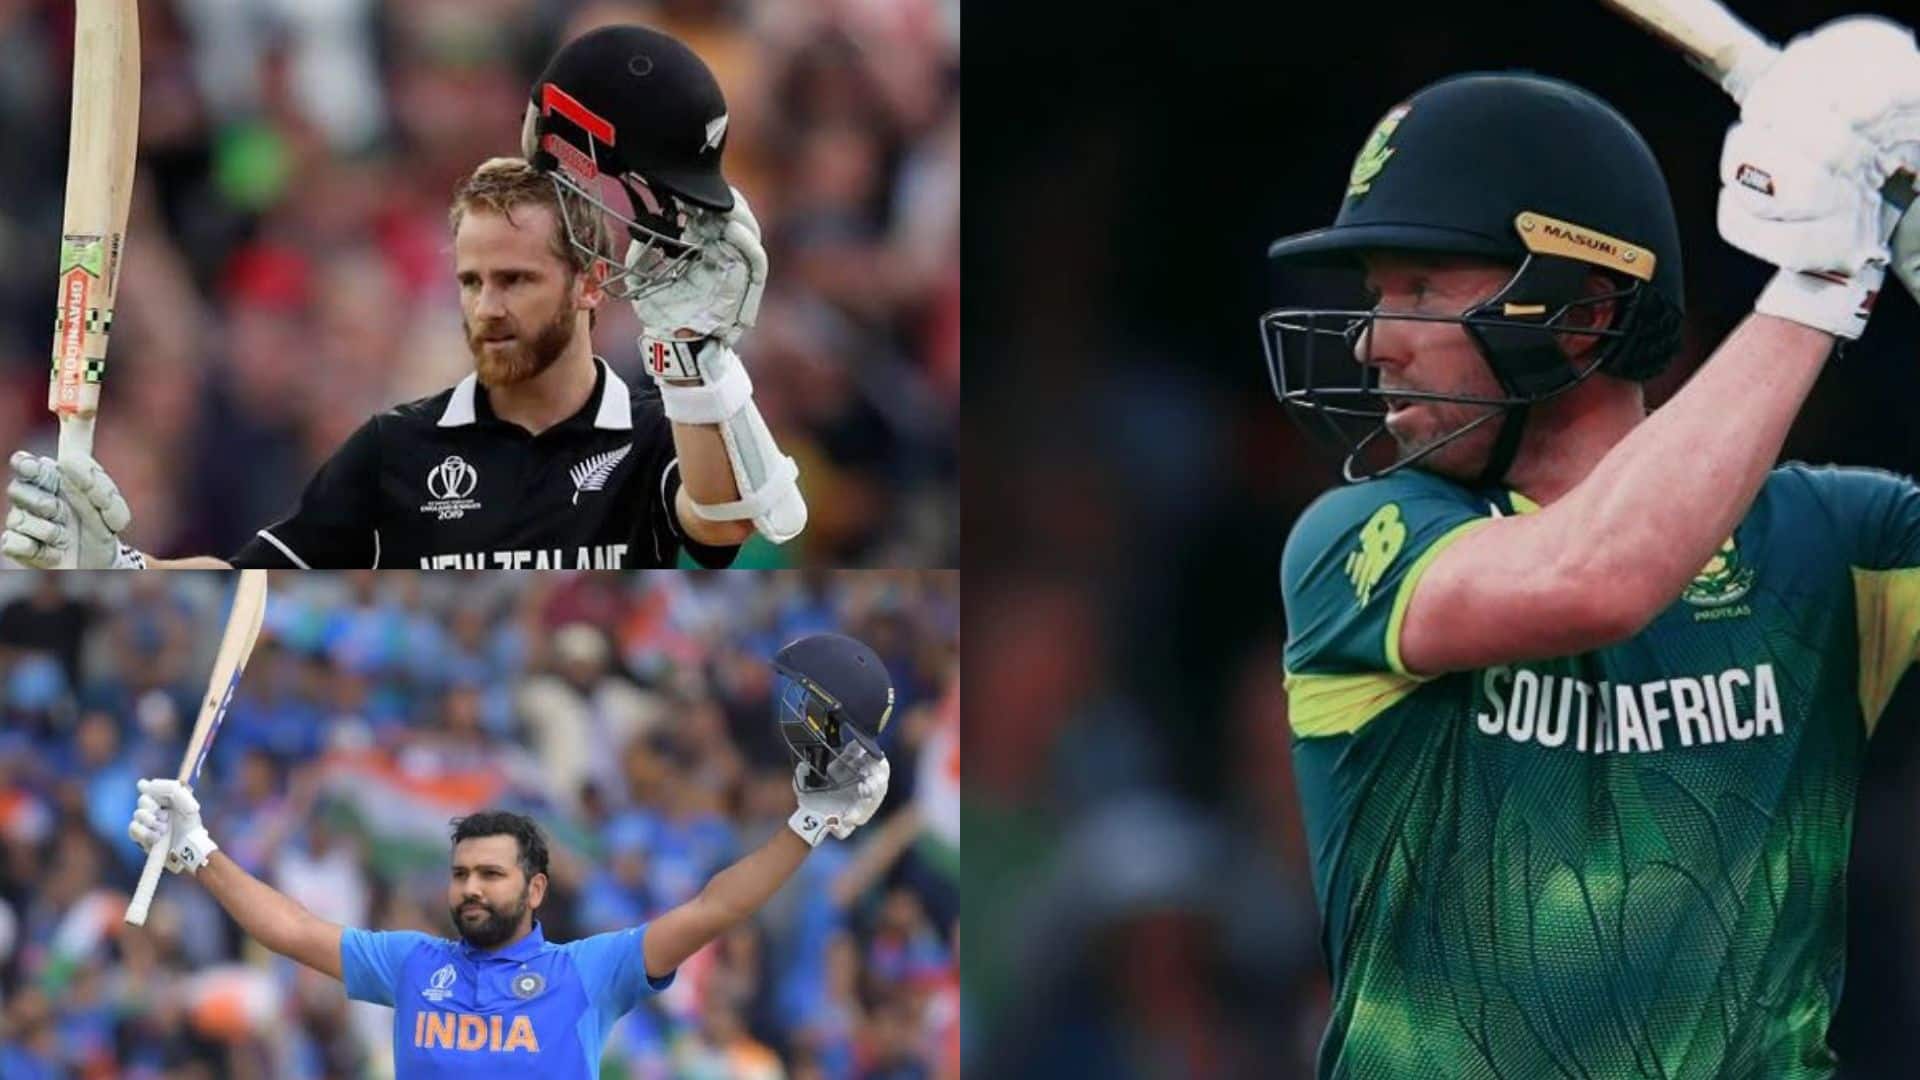 From Rohit Sharma to AB de Villiers: 10 Legendary Cricketers Who Never Won A World Cup